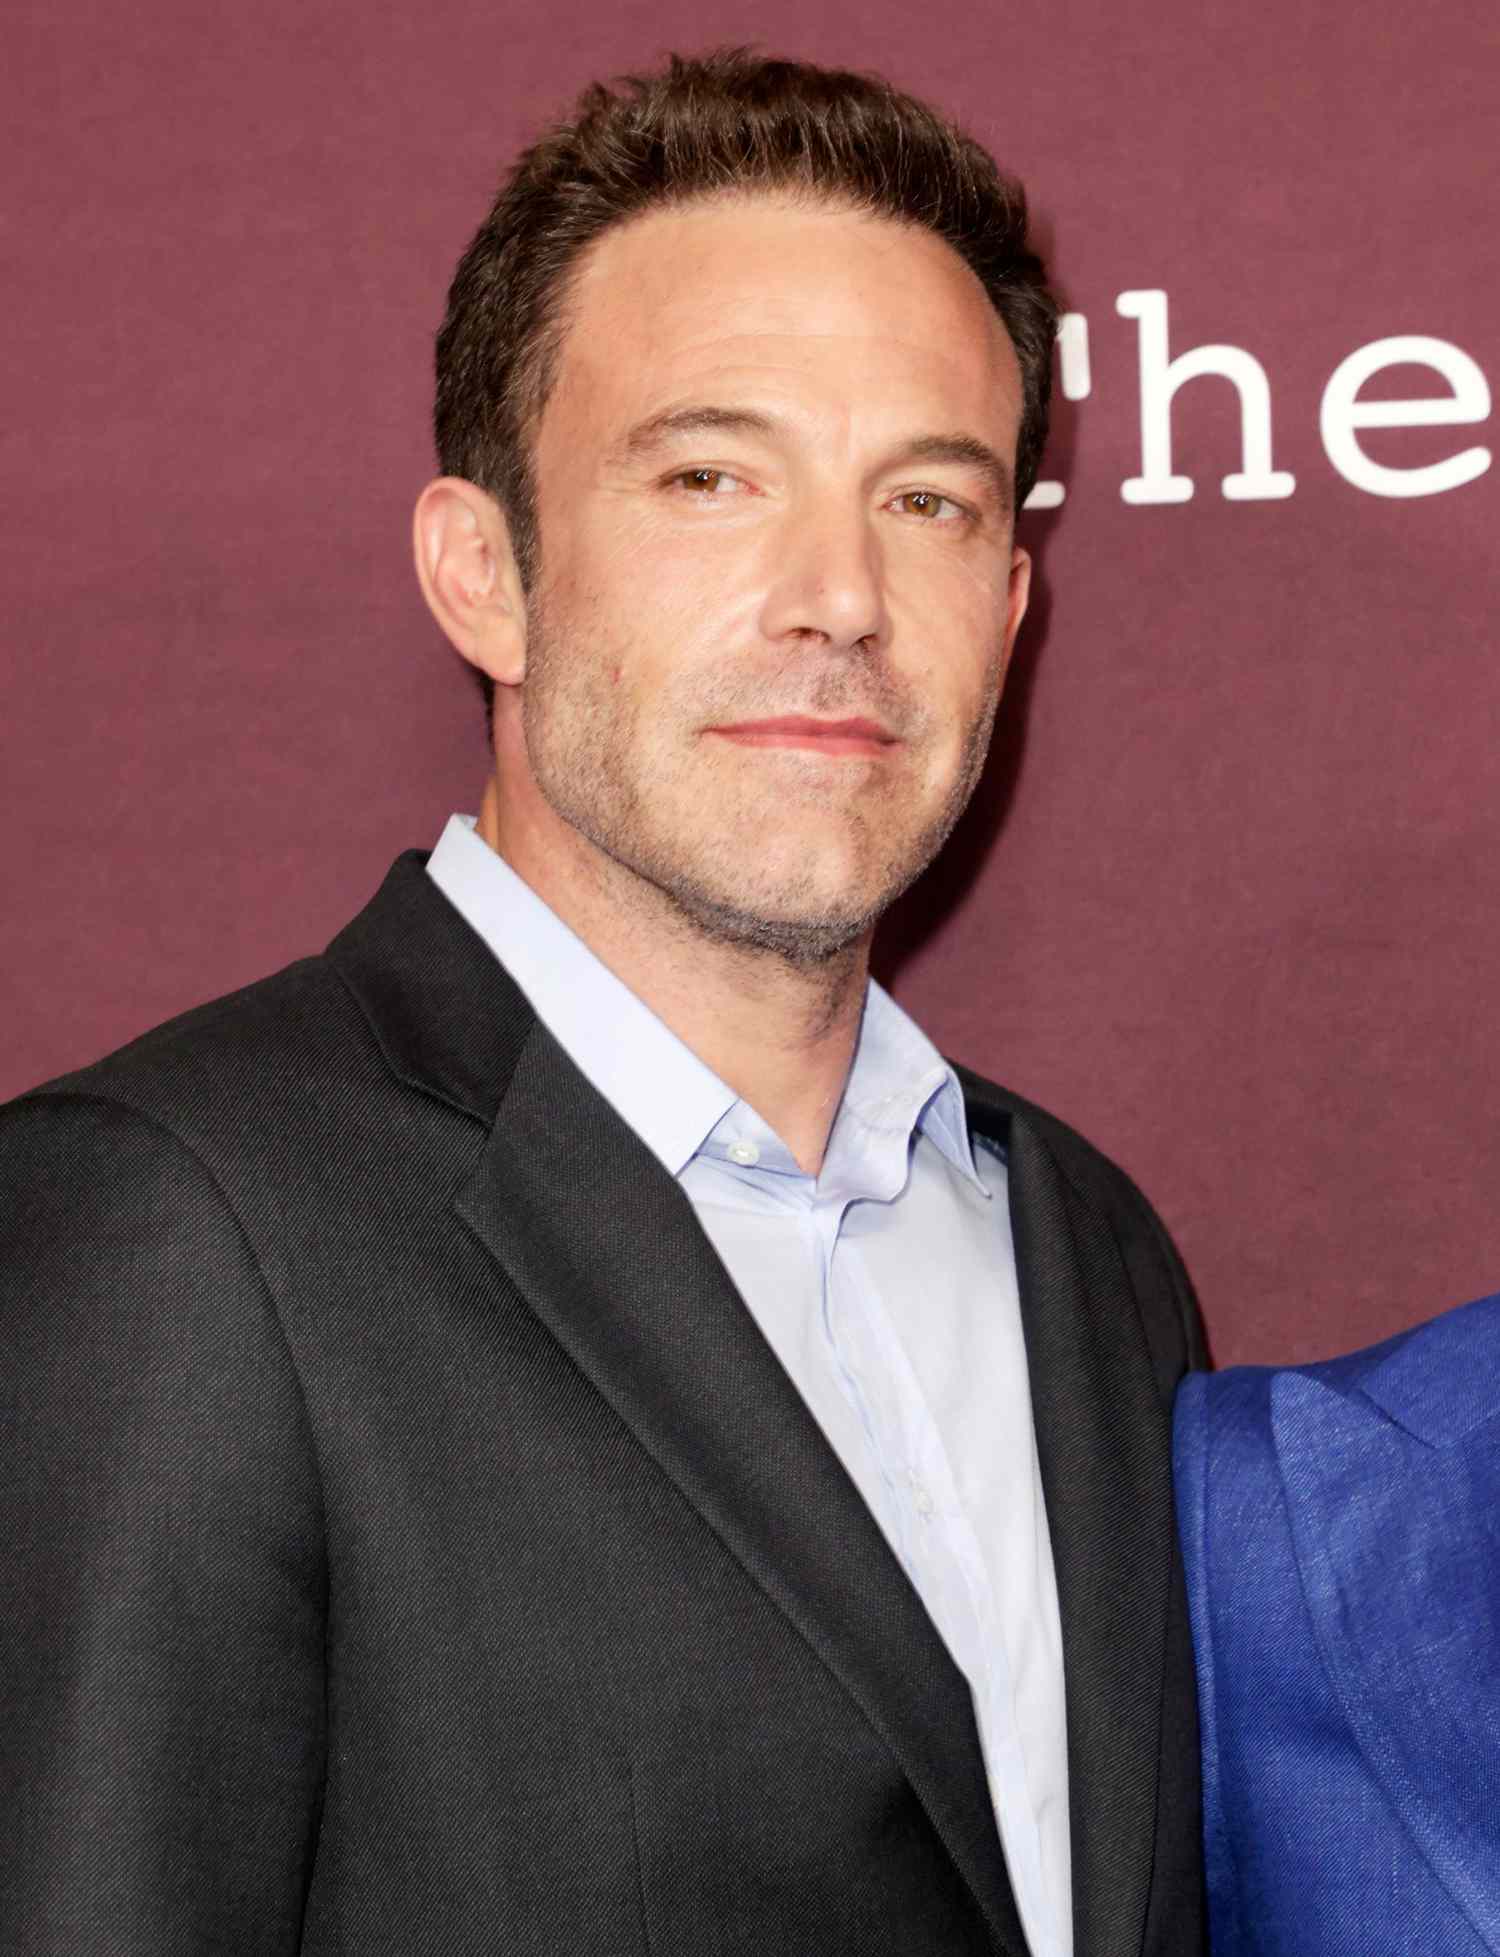 Ben Affleck attends the Los Angeles Premiere of "Il Tender Bar" presented by Amazon Studios at DGA Theater Complex on October 03, 2021 a Los Angeles